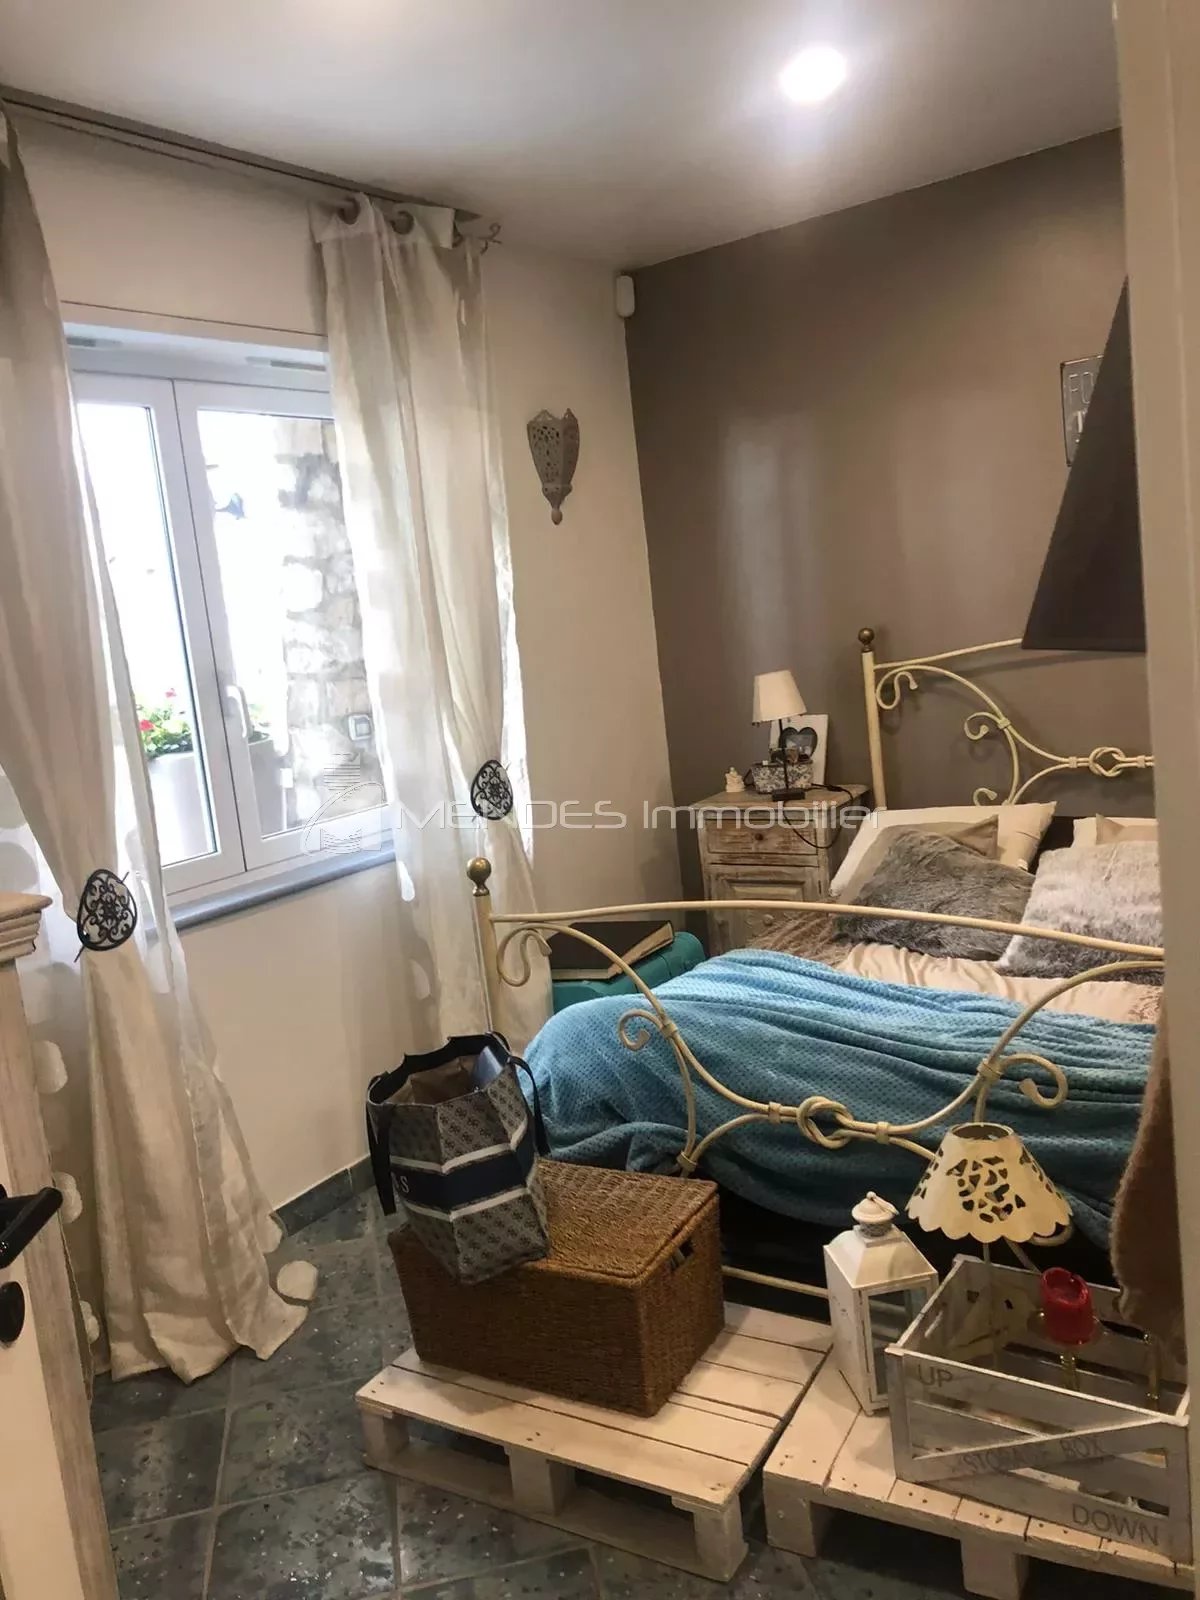 2 BR WITH POLL IN ROQUEBRUNE CAP MARTIN